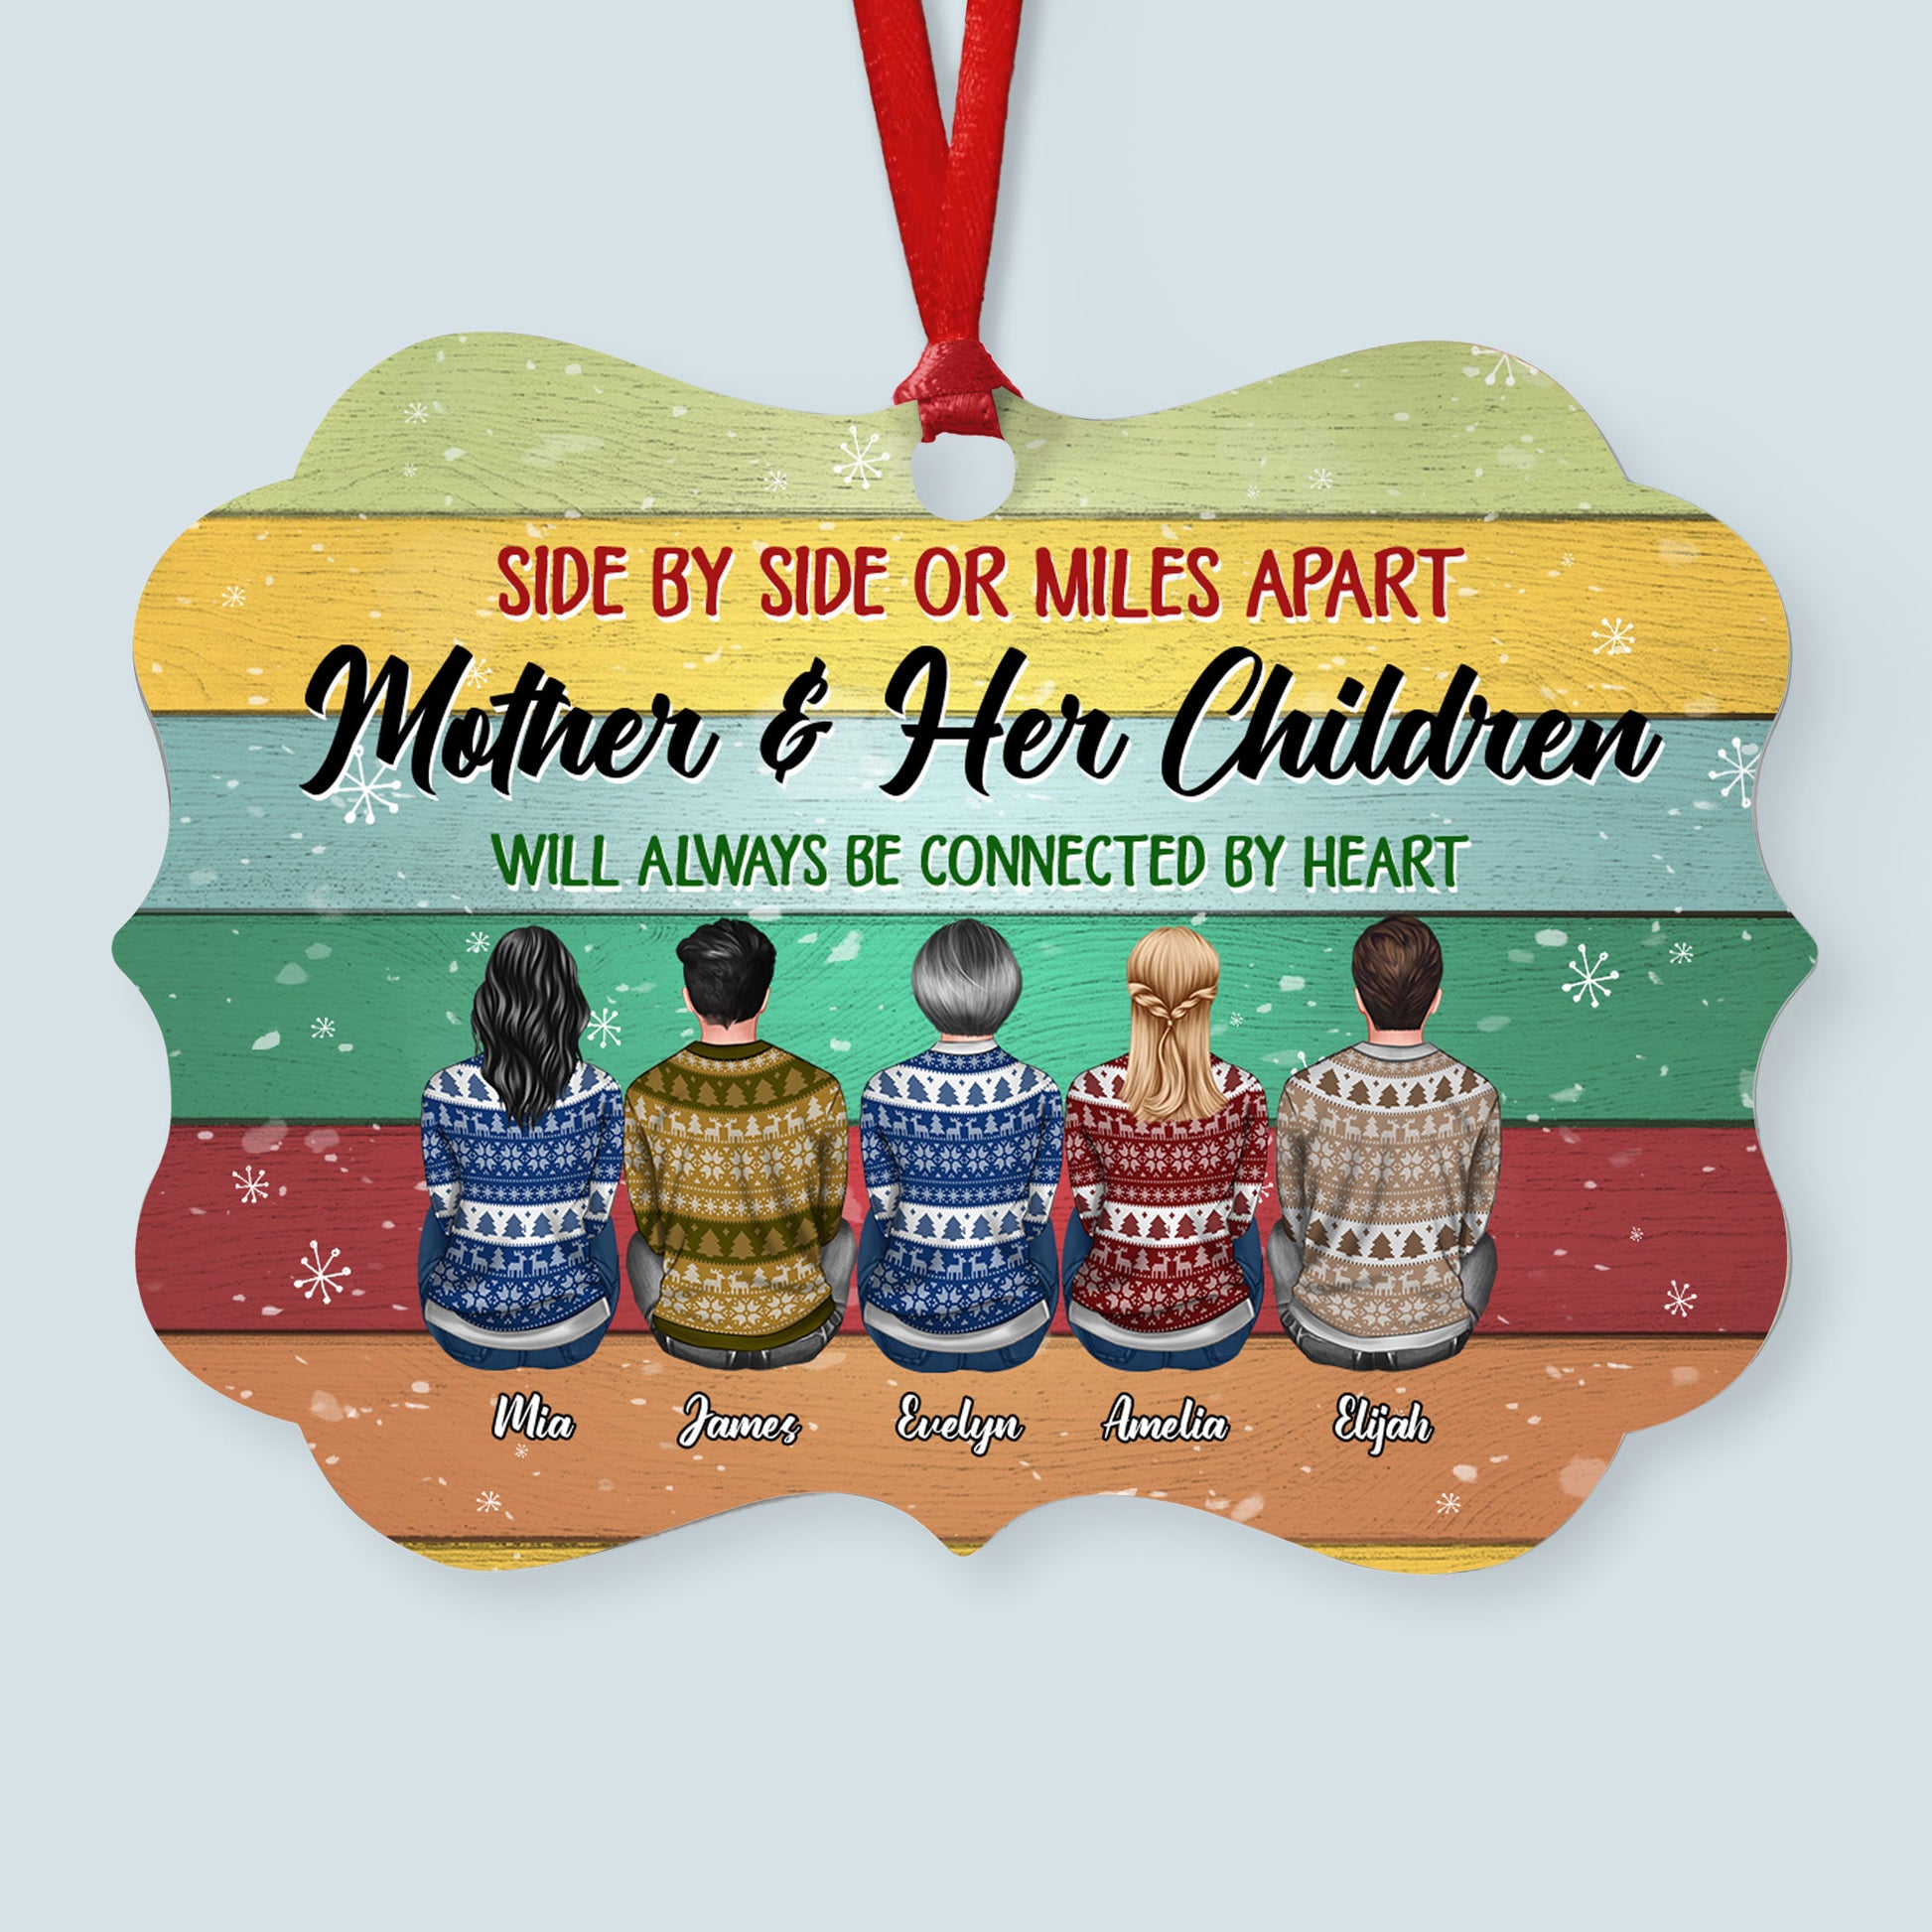 Mother And Her Children Will Always Be Connected By Heart - Personalized Aluminum Ornament - Christmas Gift Mother Ornament For Dad, Mom - Ugly Christmas Sweater Sitting